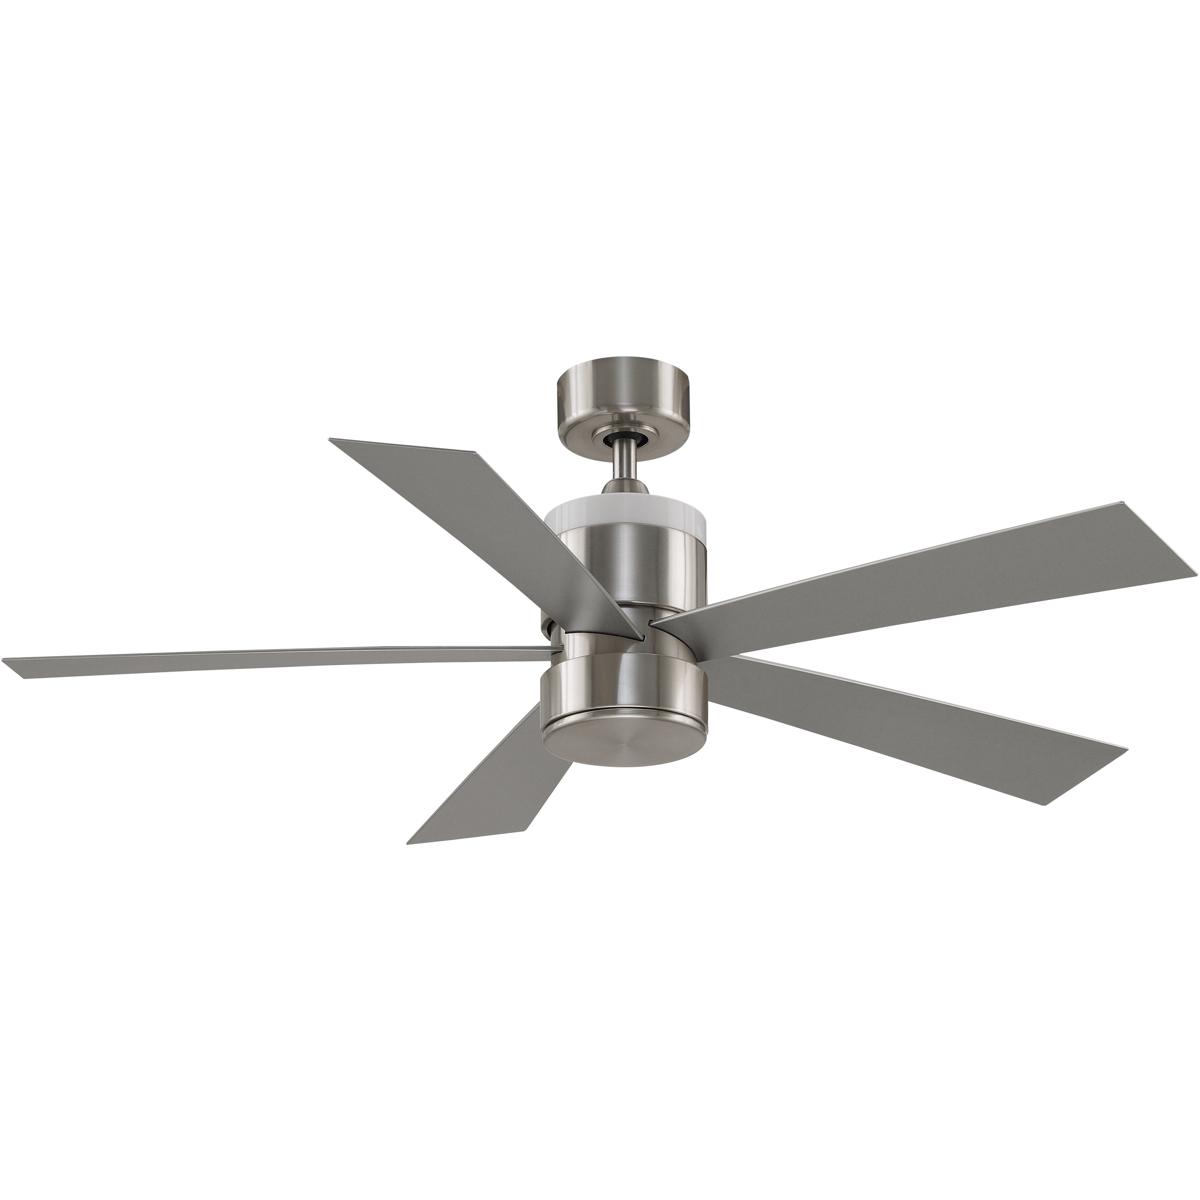 Fanimation Fans FP8458BN Torch 52 inch Brushed Nickel ...